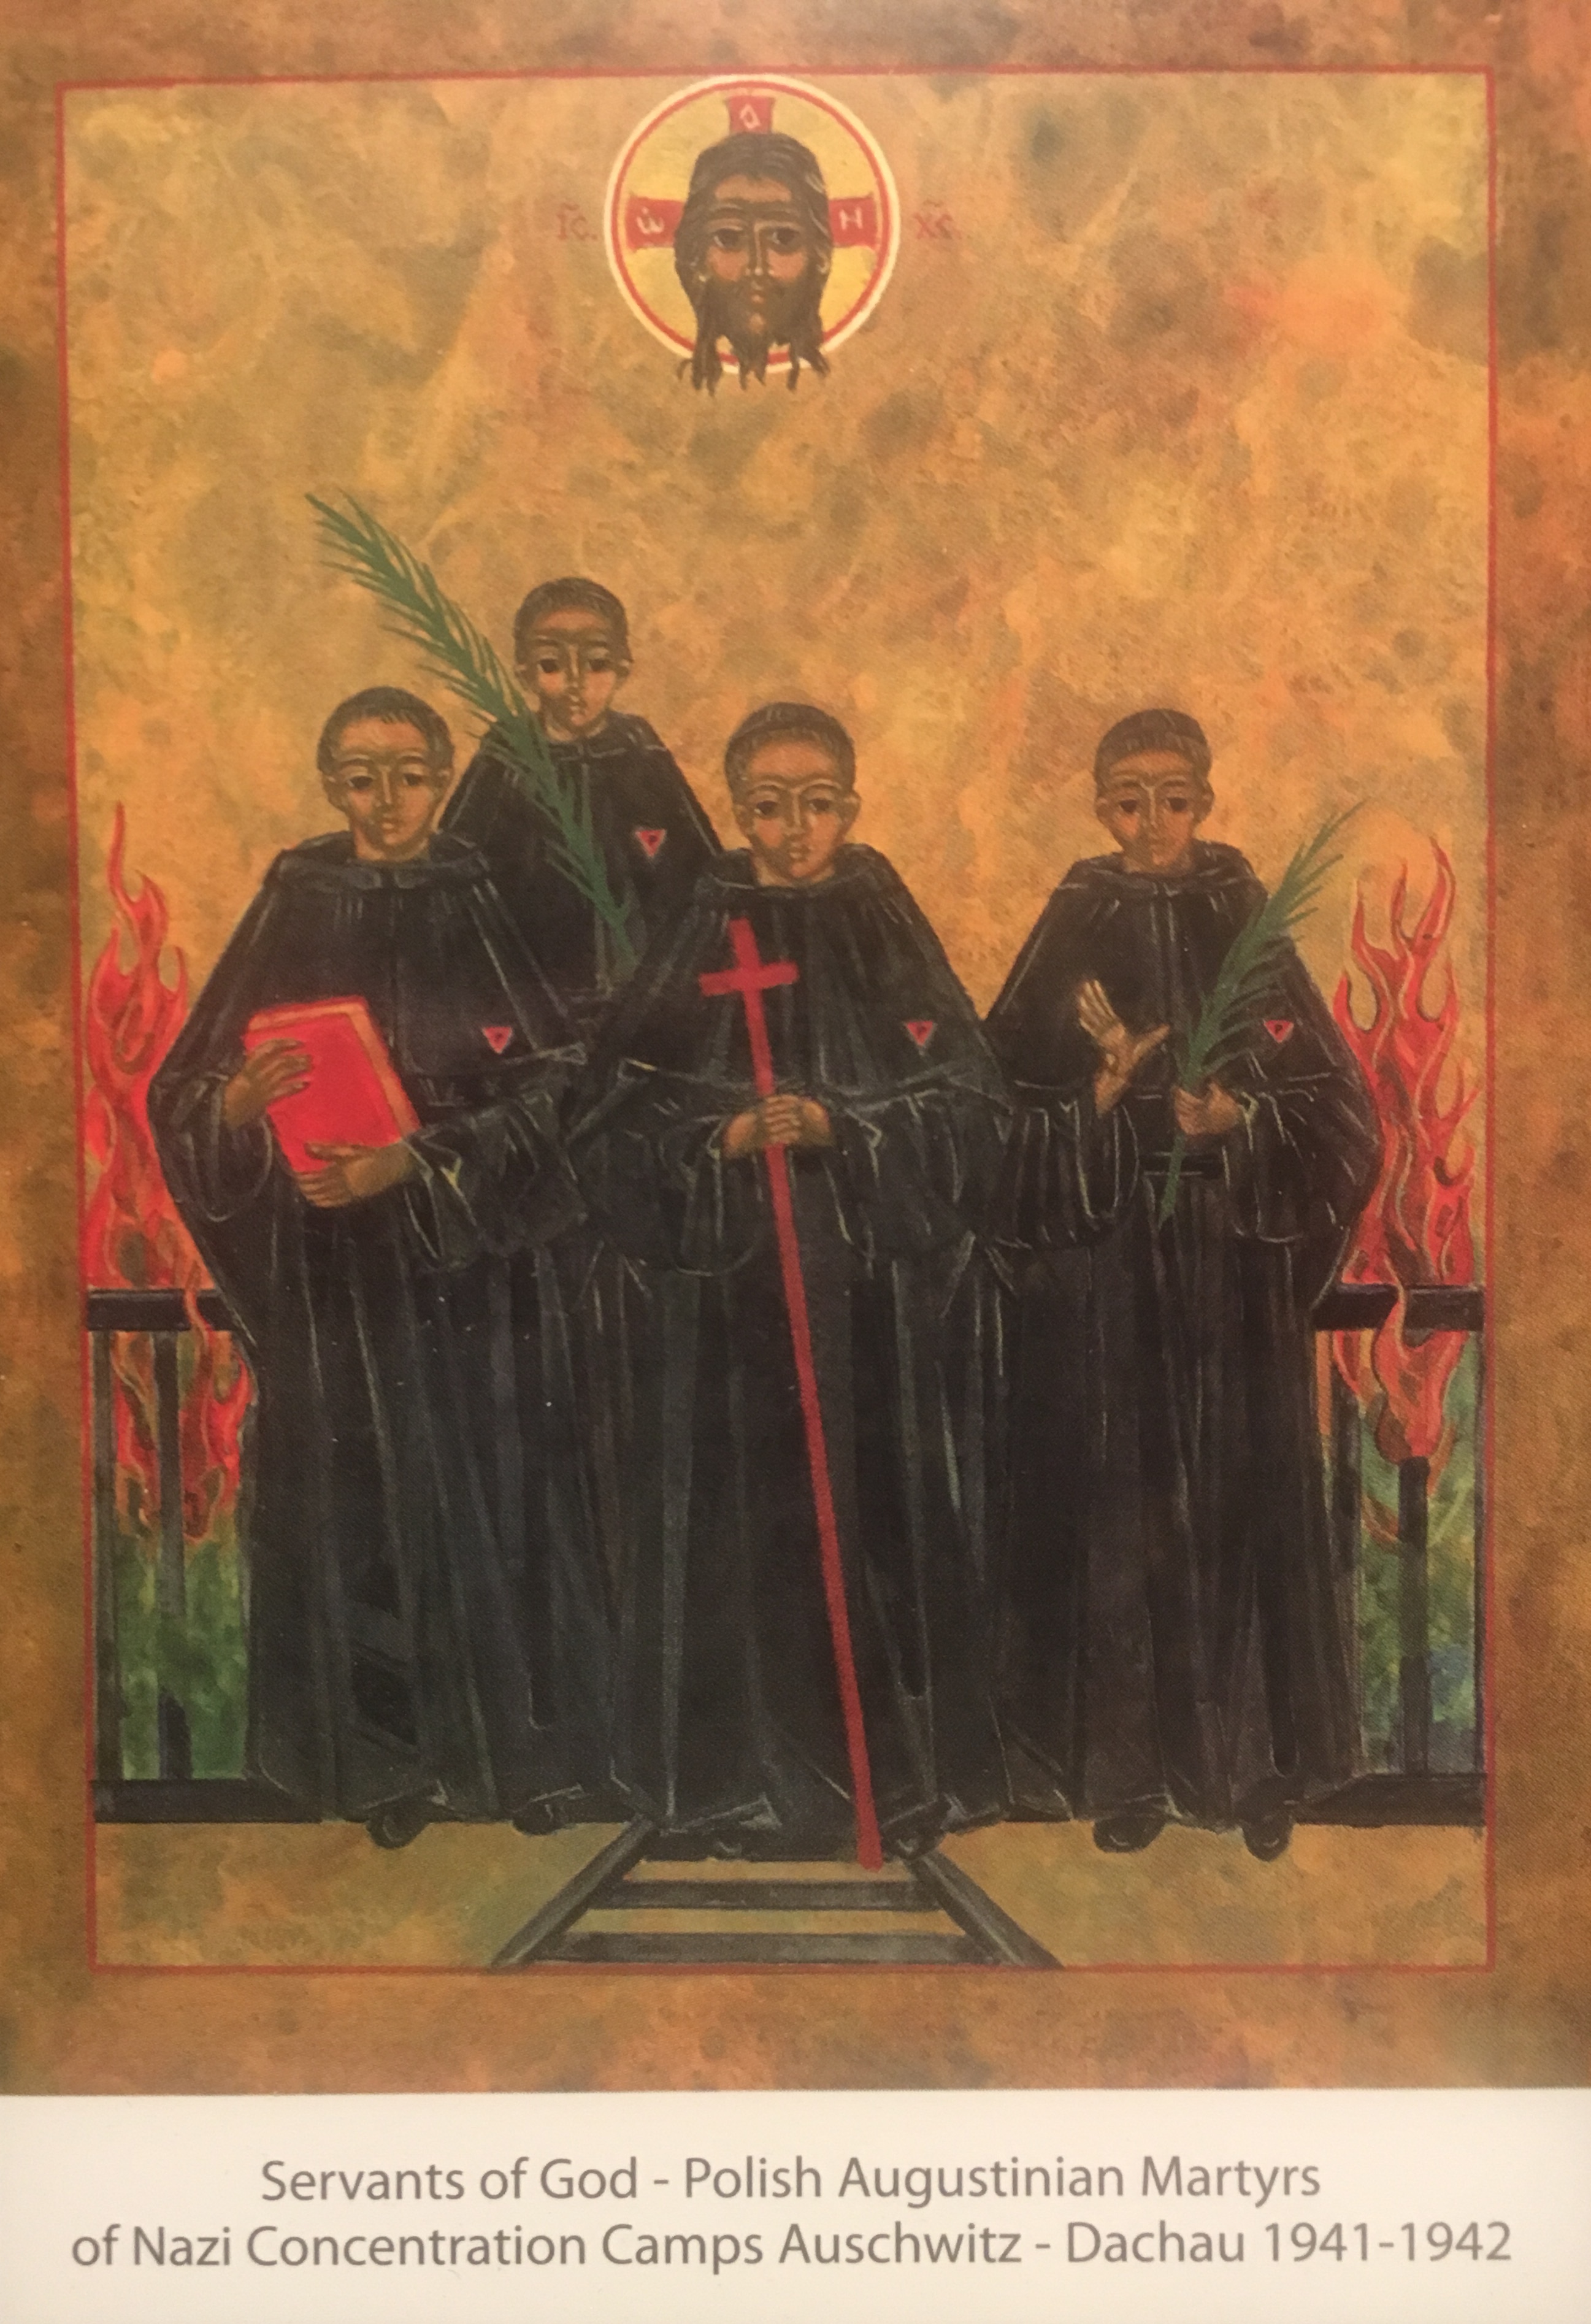 [the Augustinian Martyrs]